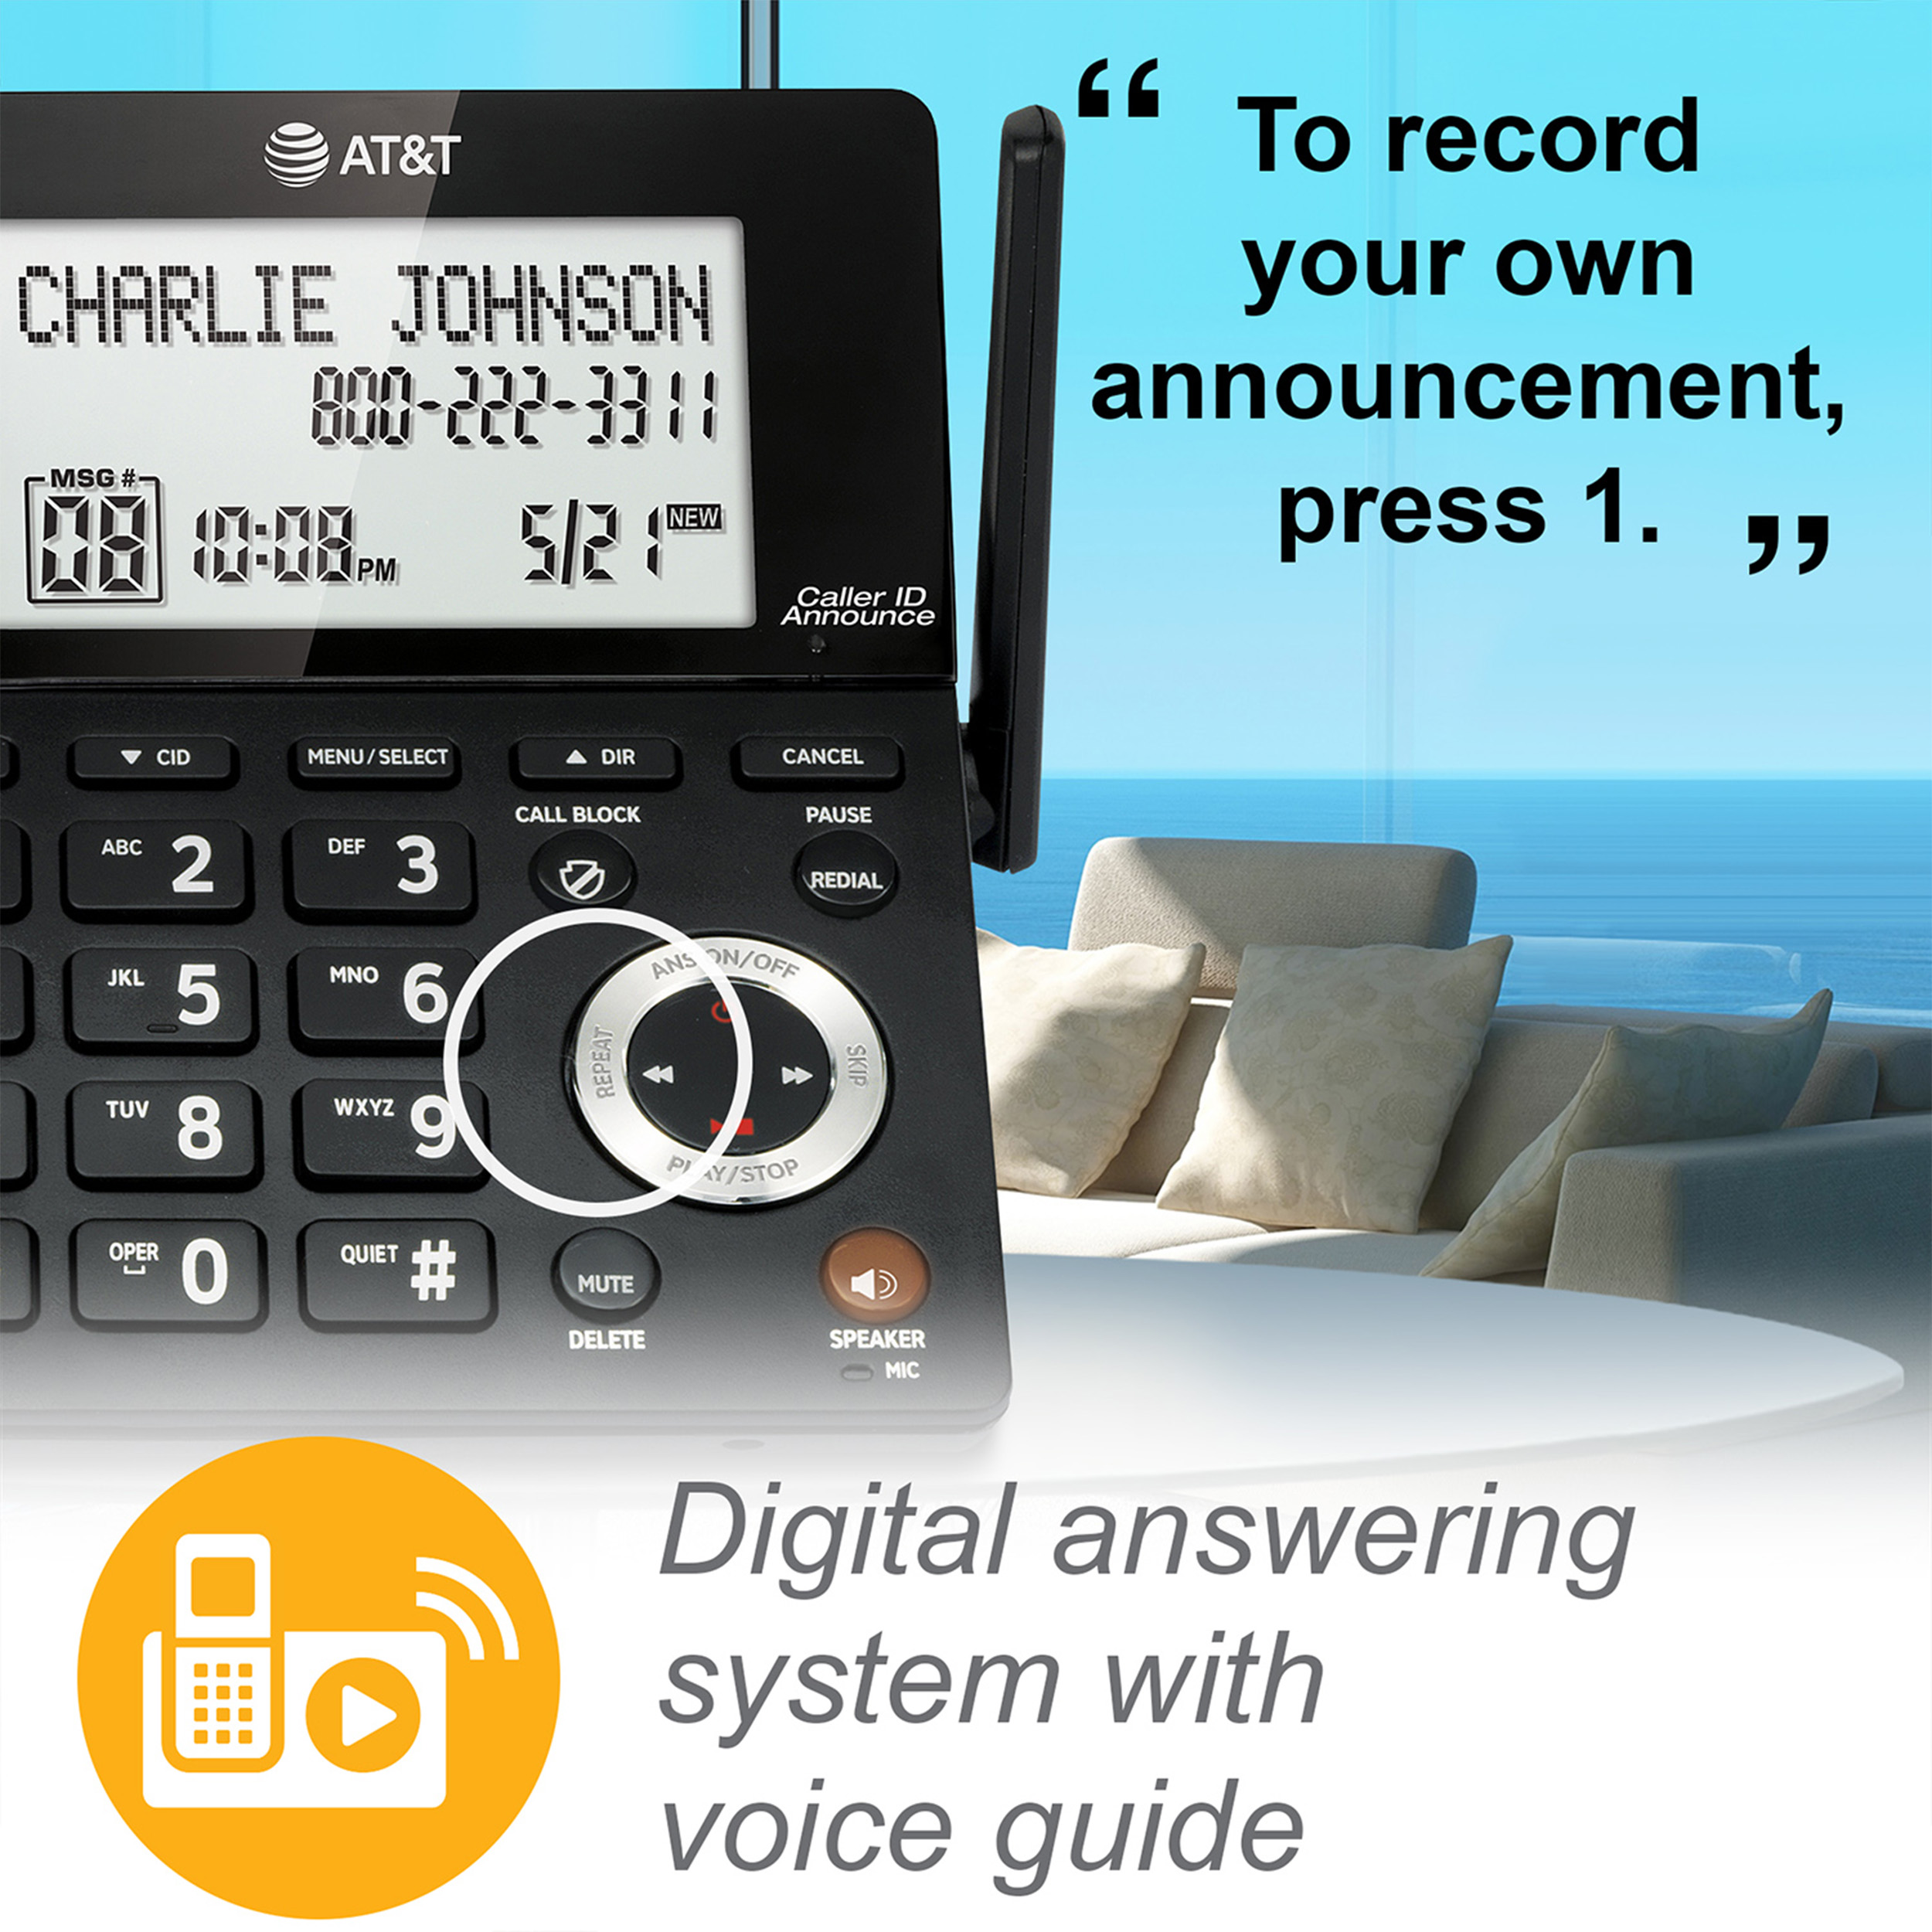 3 handset cordless answering system with caller ID/call waiting - view 9